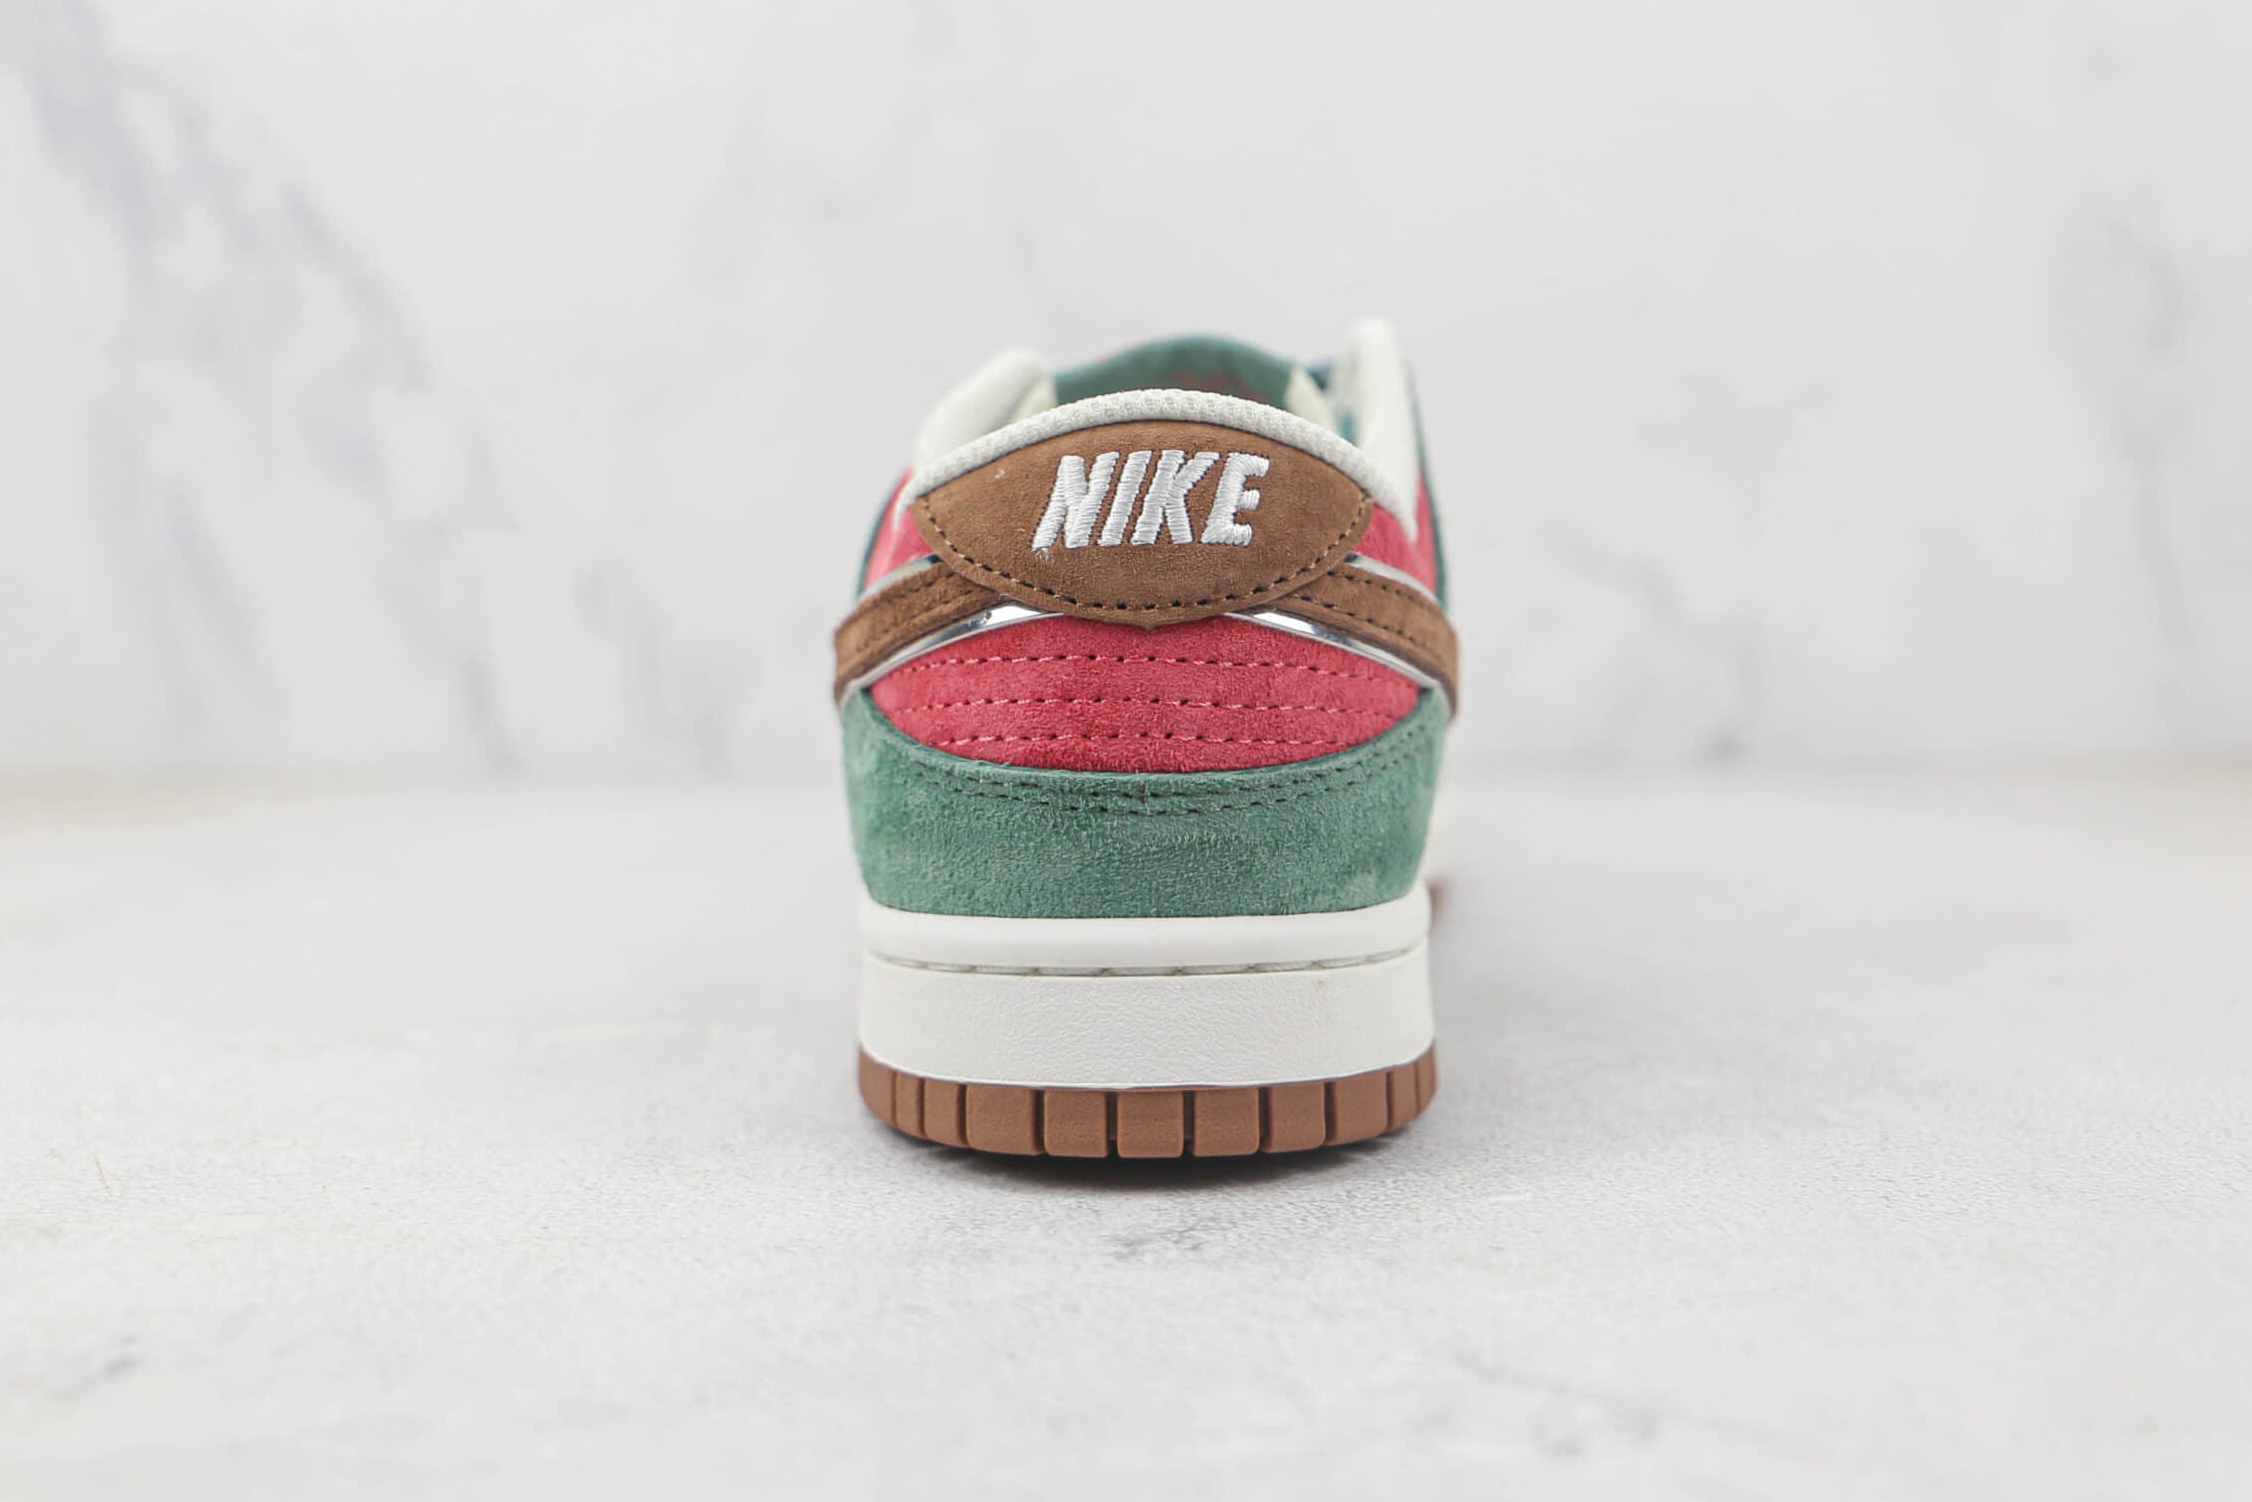 Otomo Katsuhiro x Nike SB Dunk Low Steamboy OST Green Red Brown ST1391-203: A Limited Edition Collaboration for Sneaker Enthusiasts